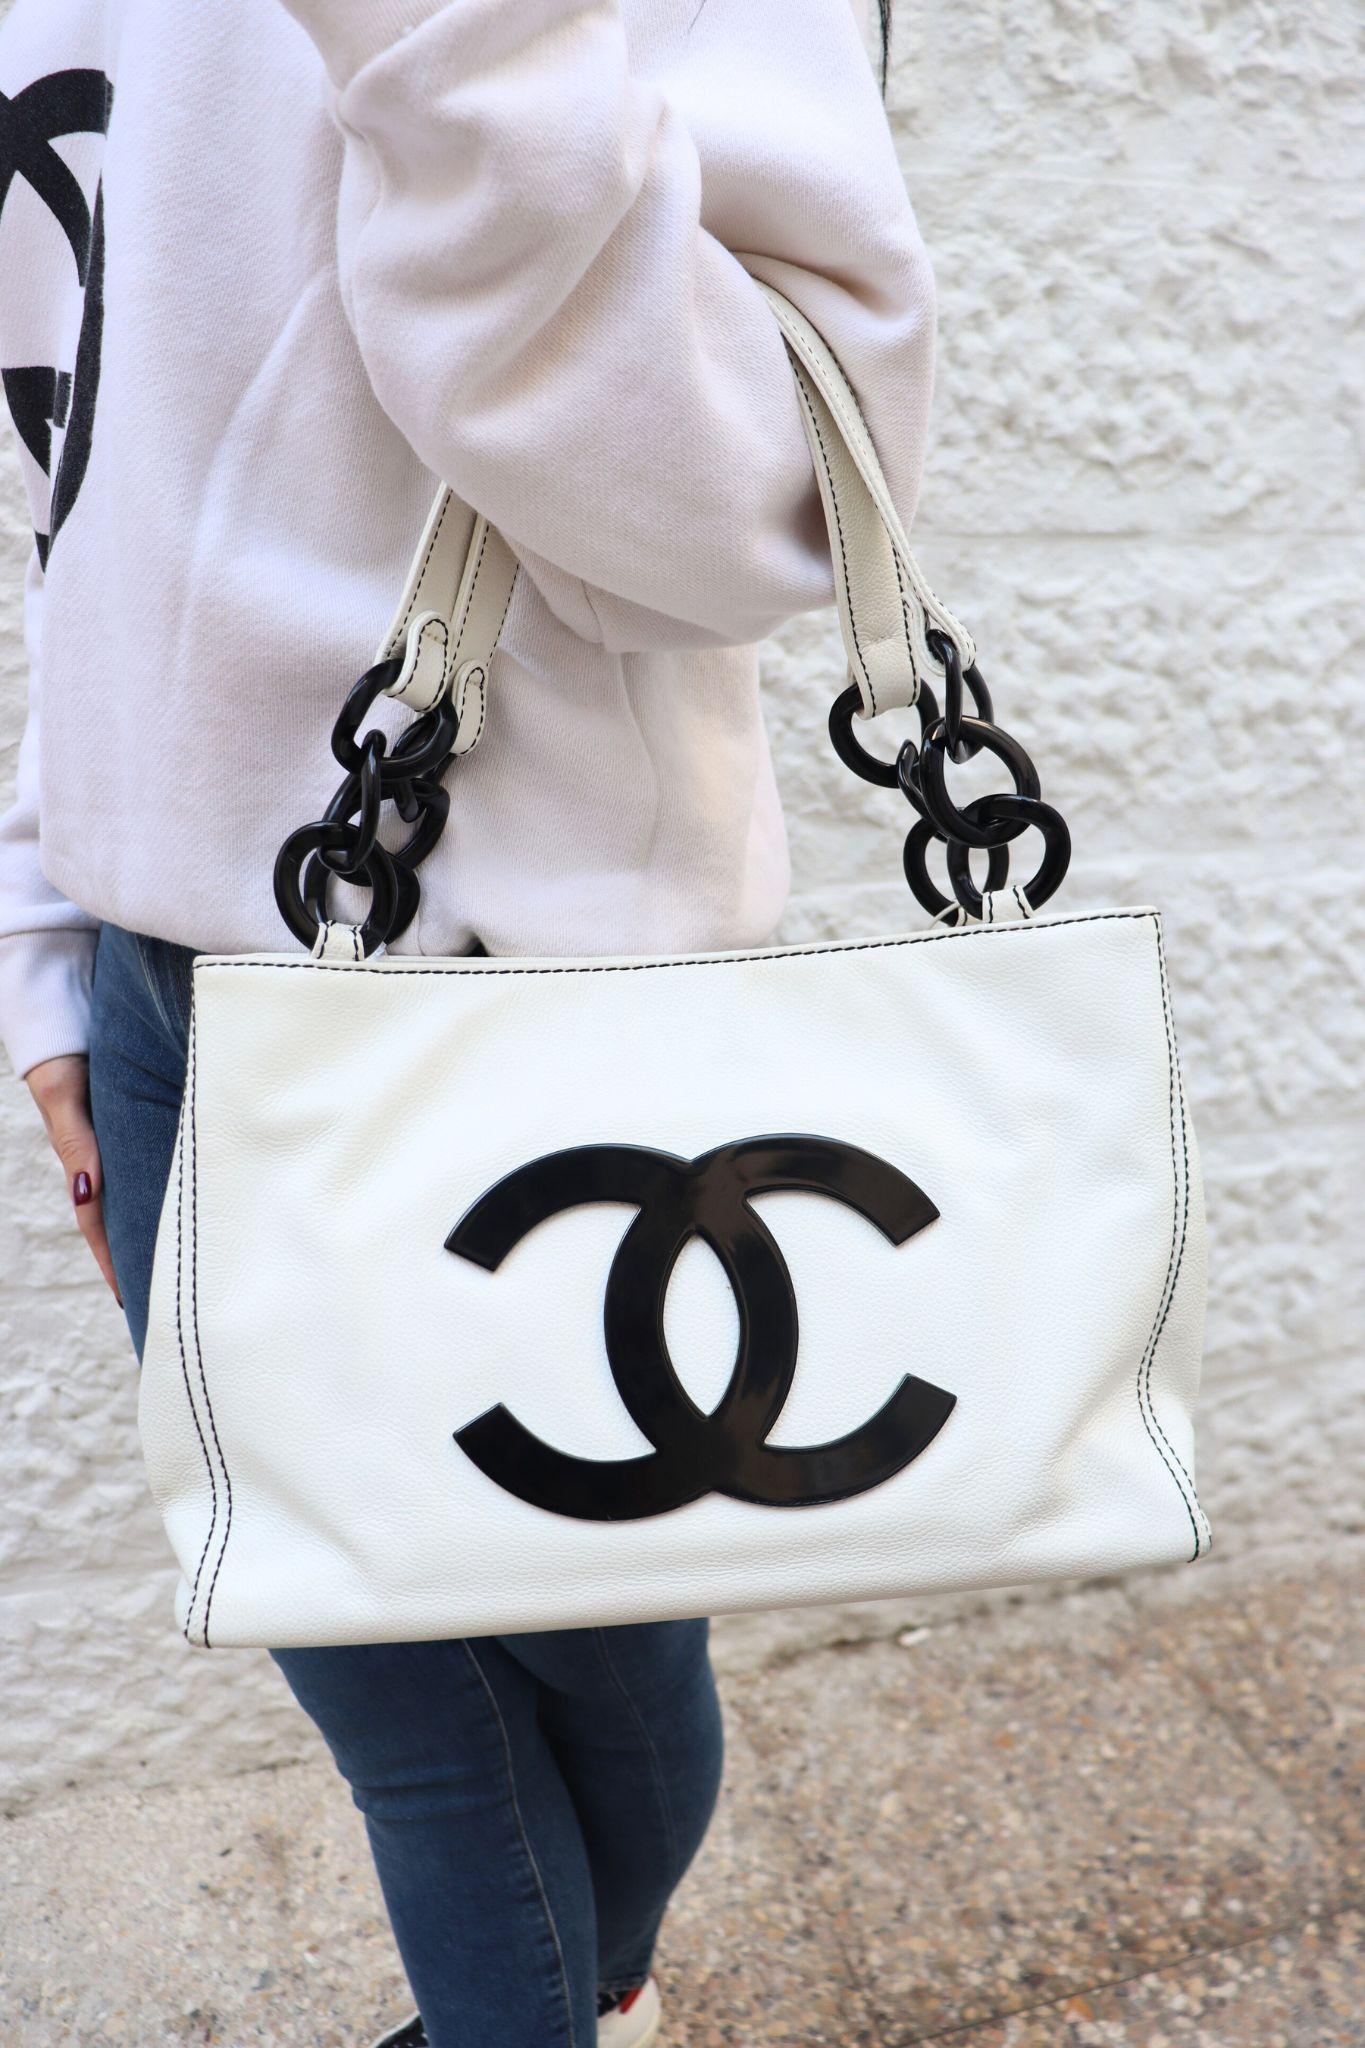 Chanel Caviar Bekko Chain Tote, Features a resin chain link to leather strap, CC logo on the front, and one interior zipper pocket.

Material: Leather.
Hardware: Black.
Height:24cm
Width: 31.5cm
Depth: 8cm
Shoulder Strap: 23cm
Overall condition: